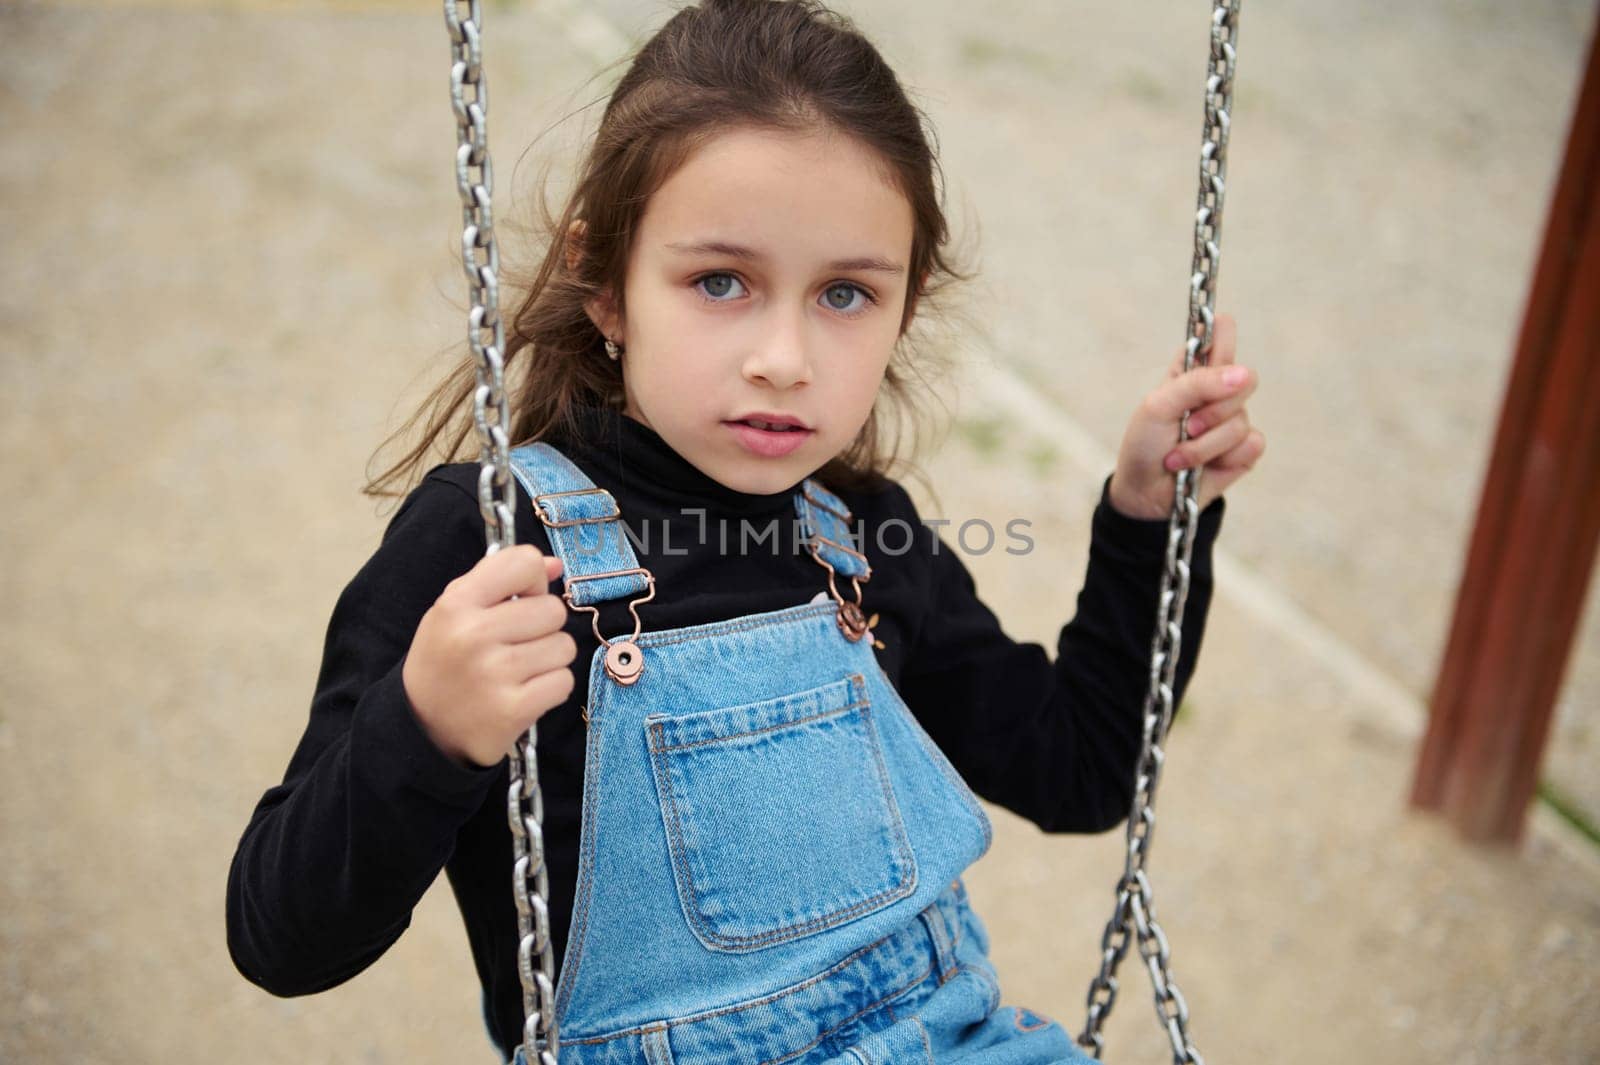 Close-up cute little child girl in denim sundress, looking confidently at camera while swinging on the outdoors playground. People. Happy carefree childhood concept. Lifestyle.